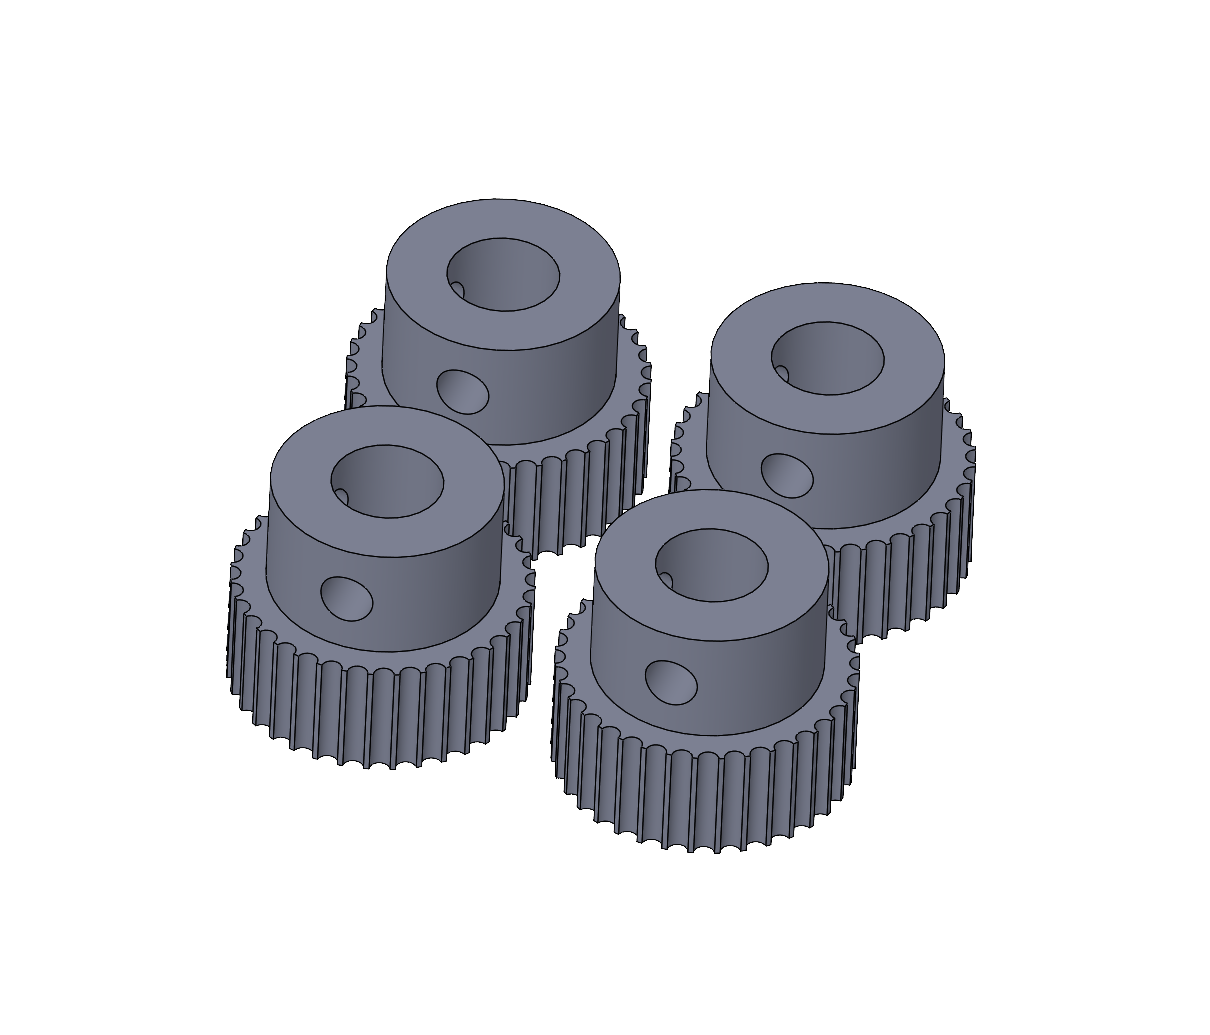 ../_images/GT2-pulley-fabrication.png